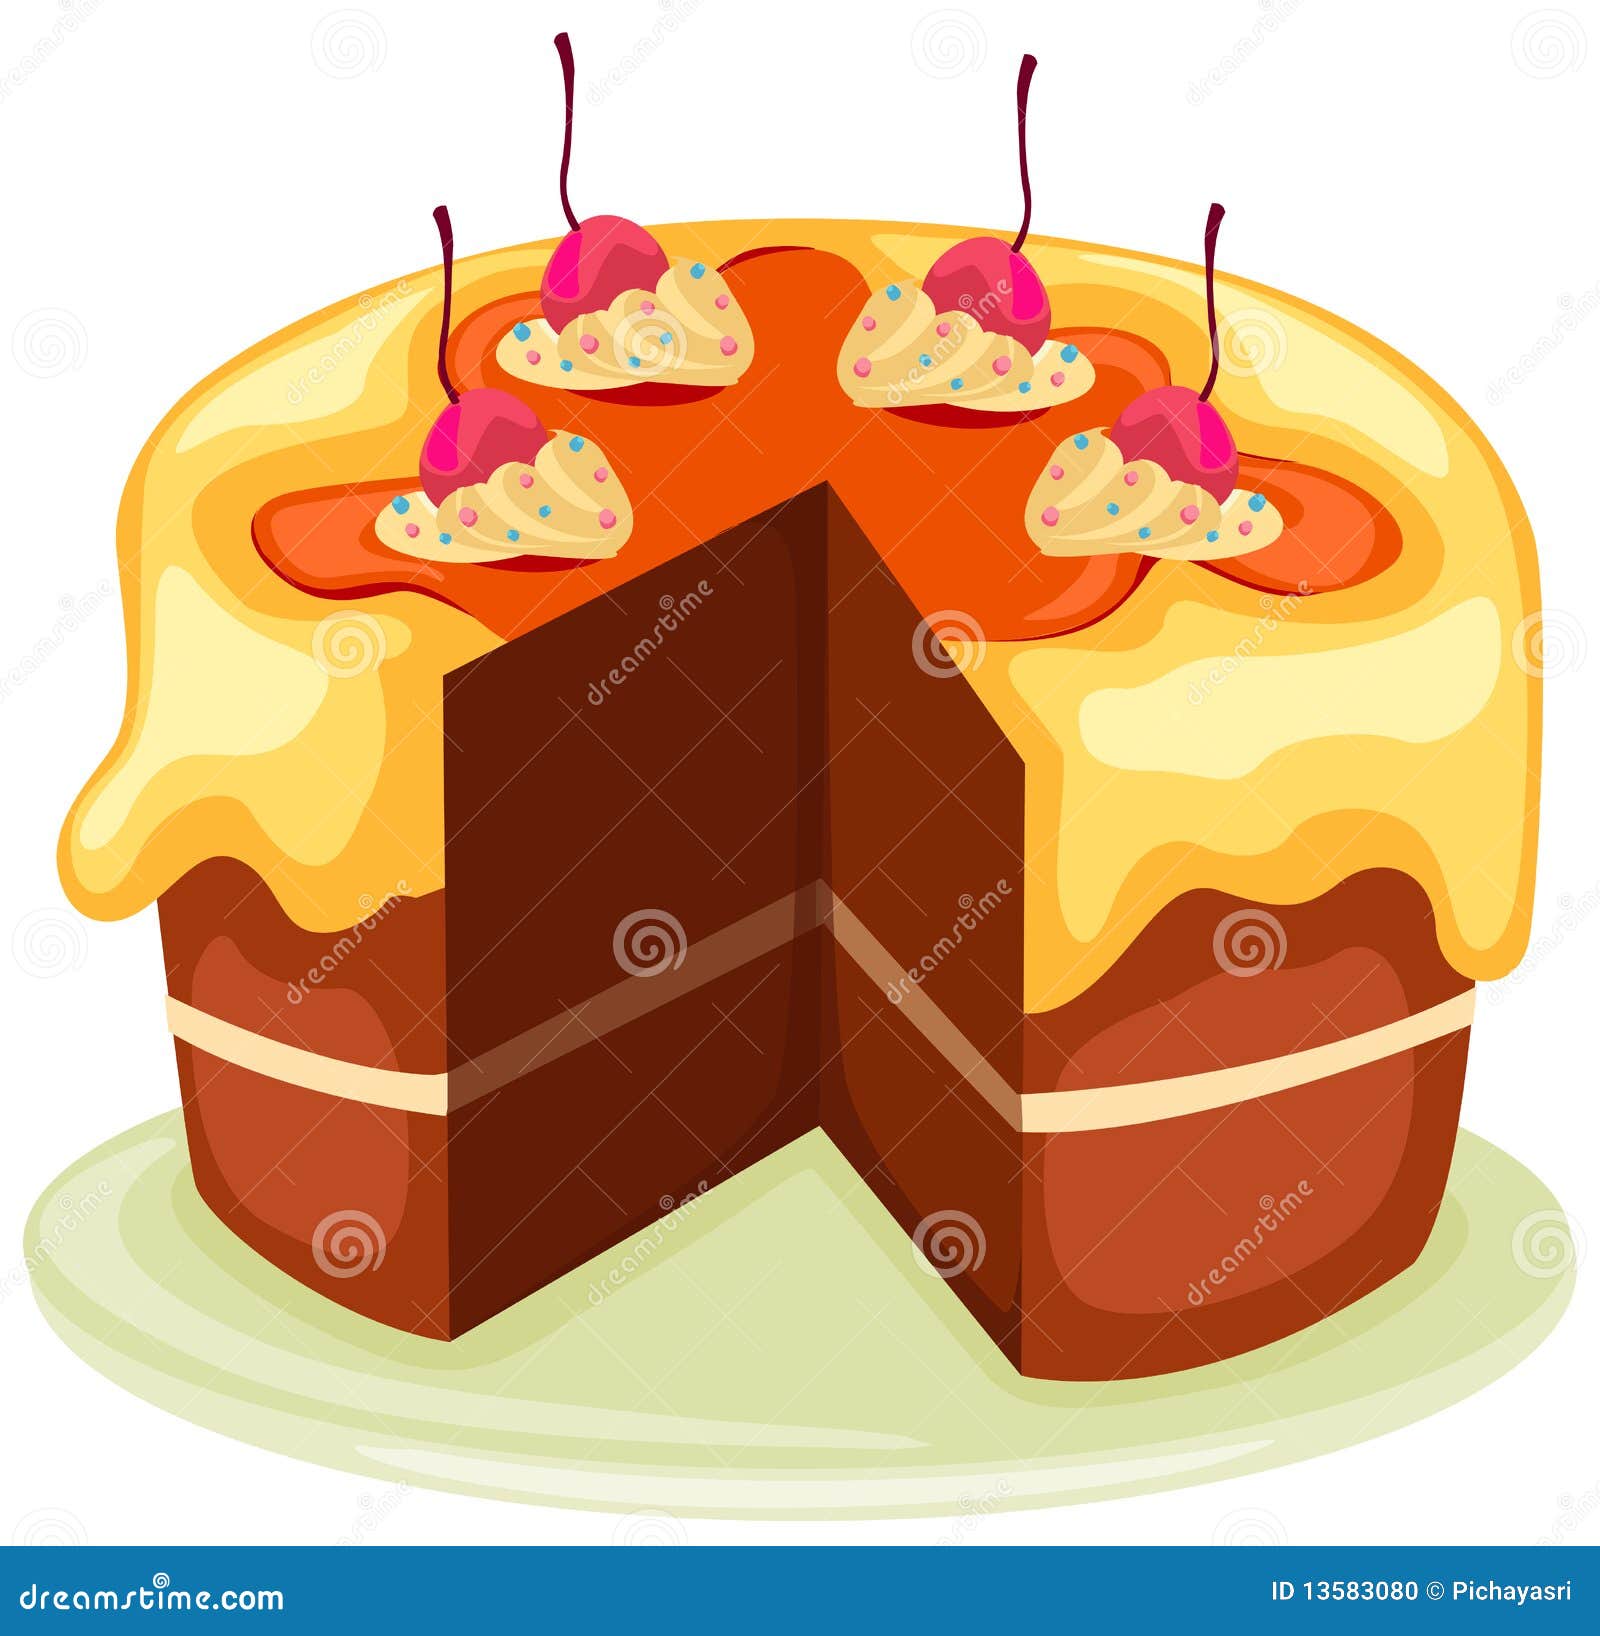 cake with slice removed